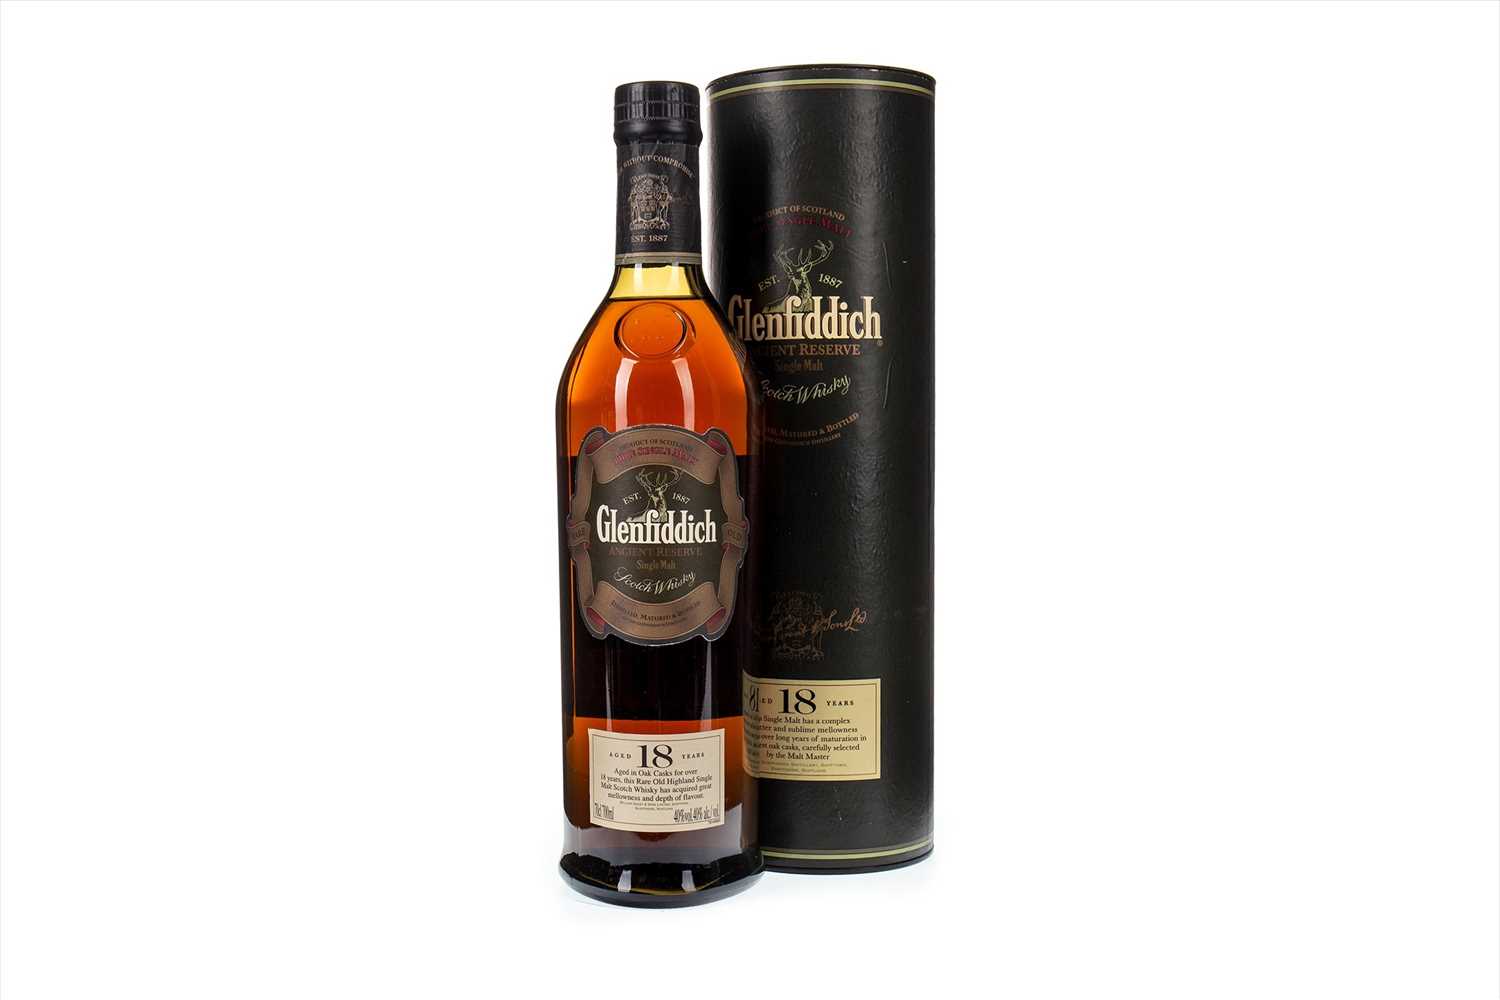 Lot 307 - GLENFIDDICH ANCIENT RESERVE AGED 18 YEARS